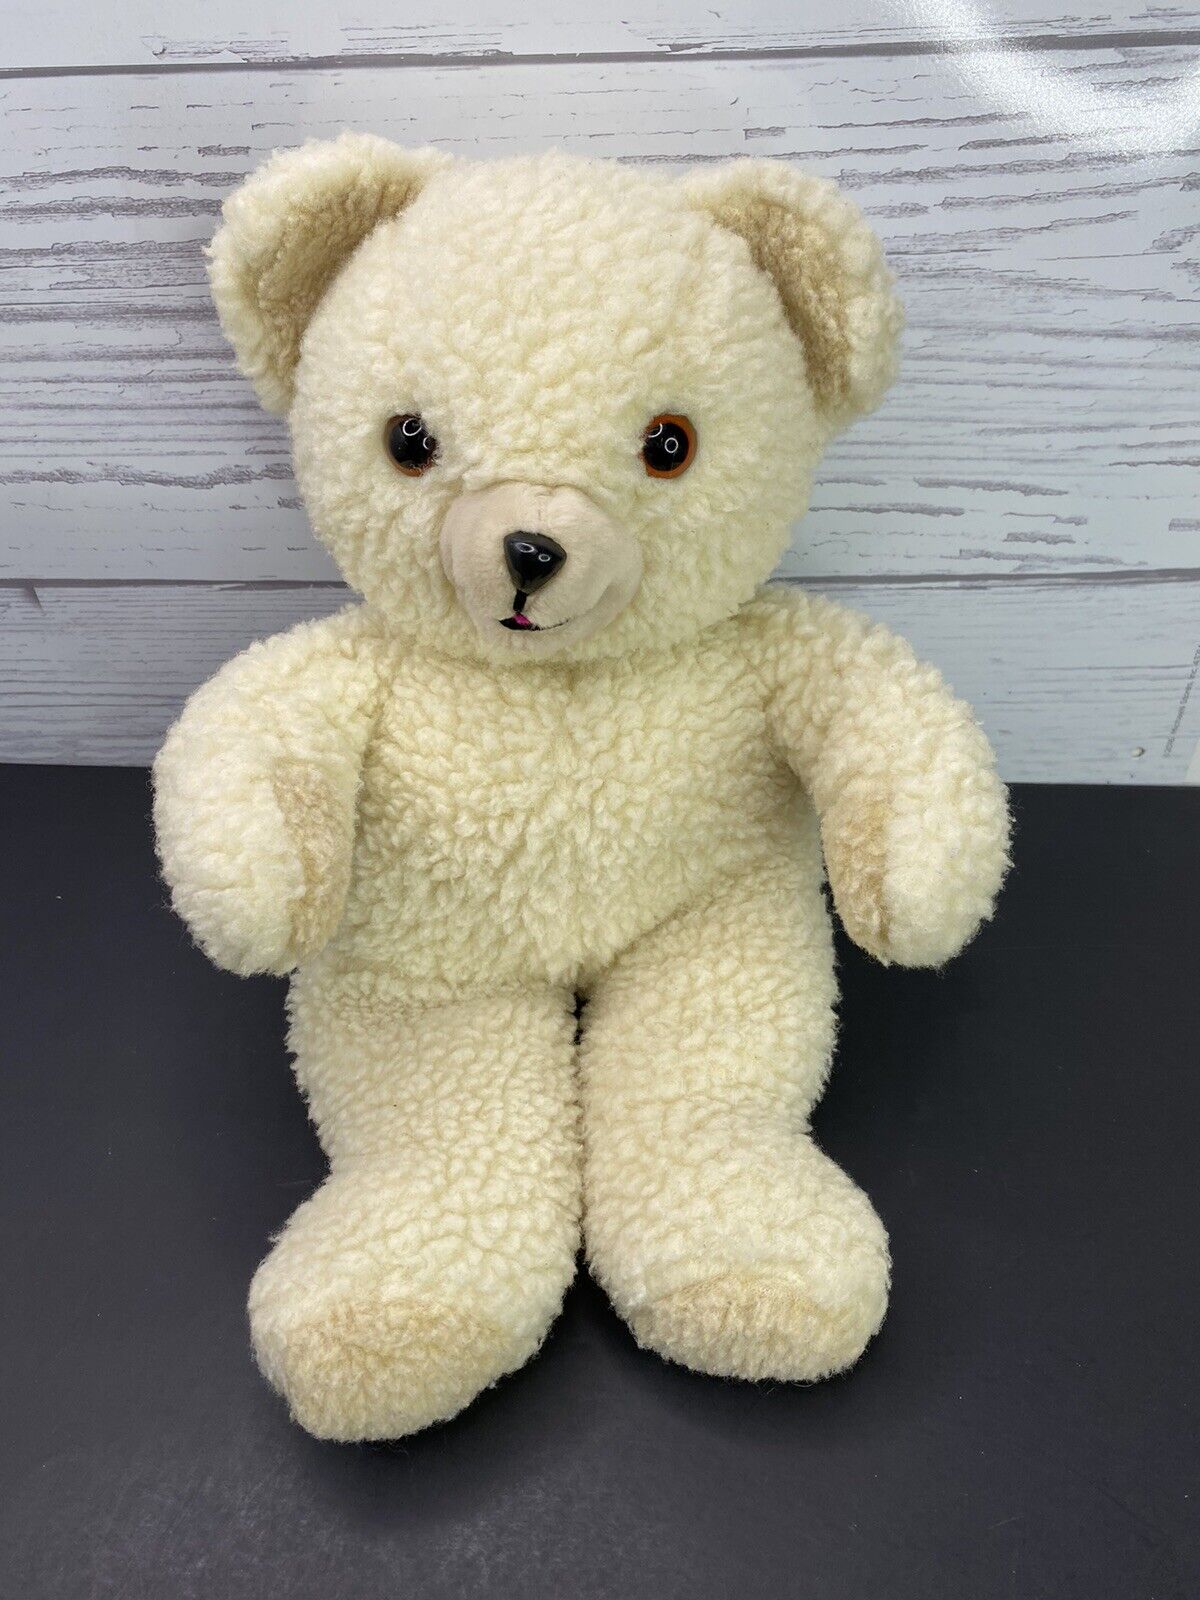 Snuggle Bear Plush 1985 Lever Brothers Fabric Softener Russ Vintage 16” Tall